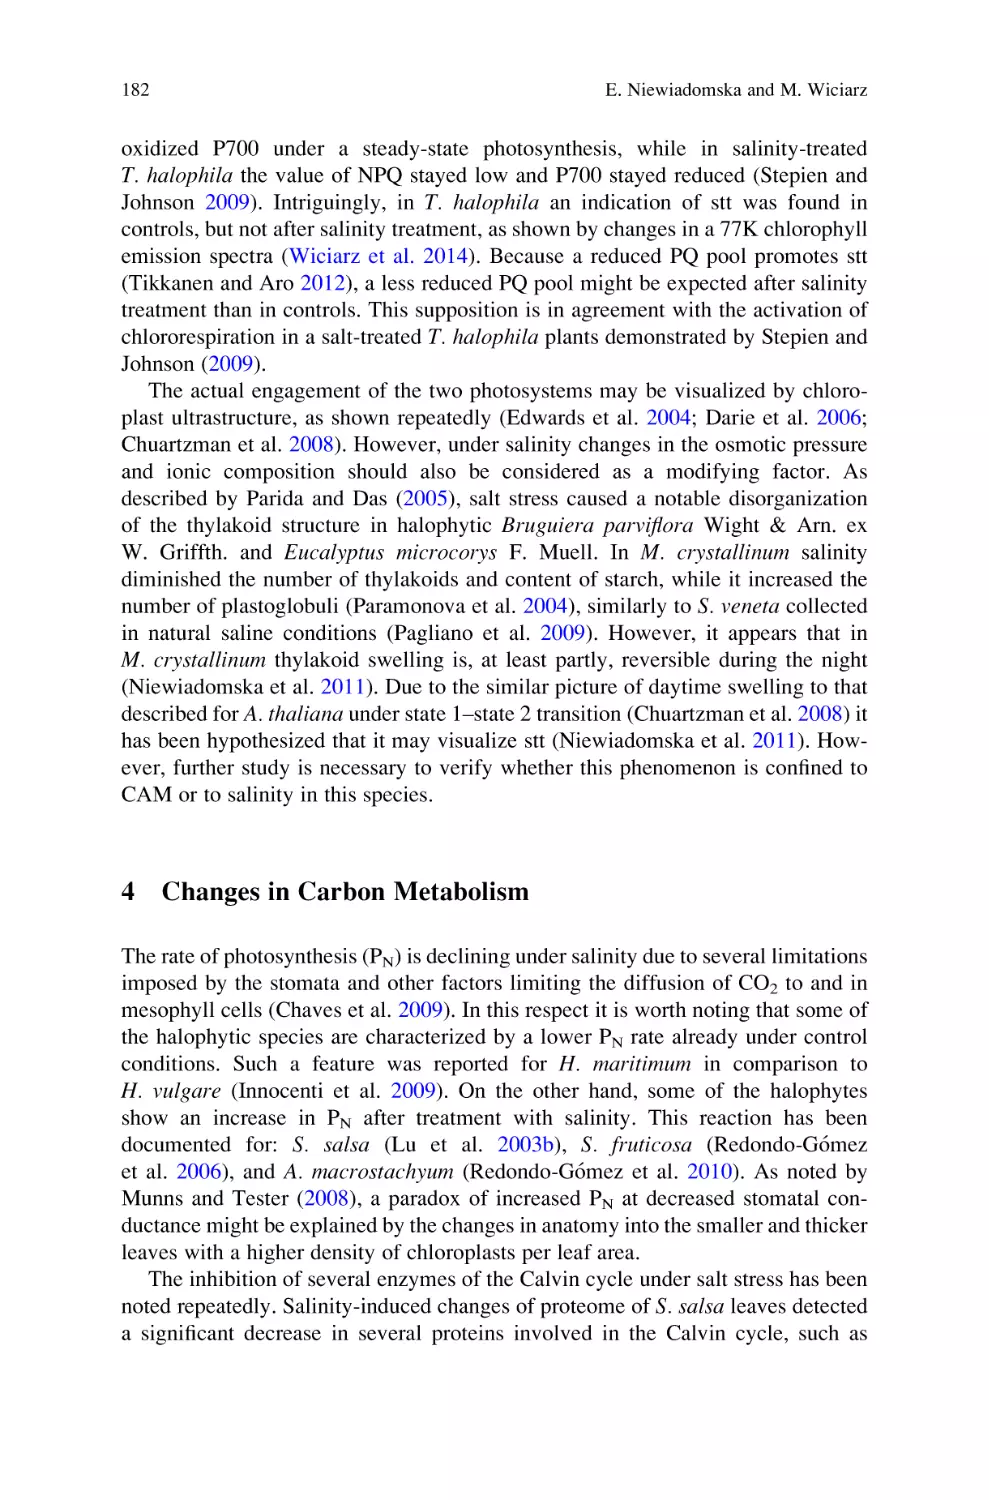 4 Changes in Carbon Metabolism